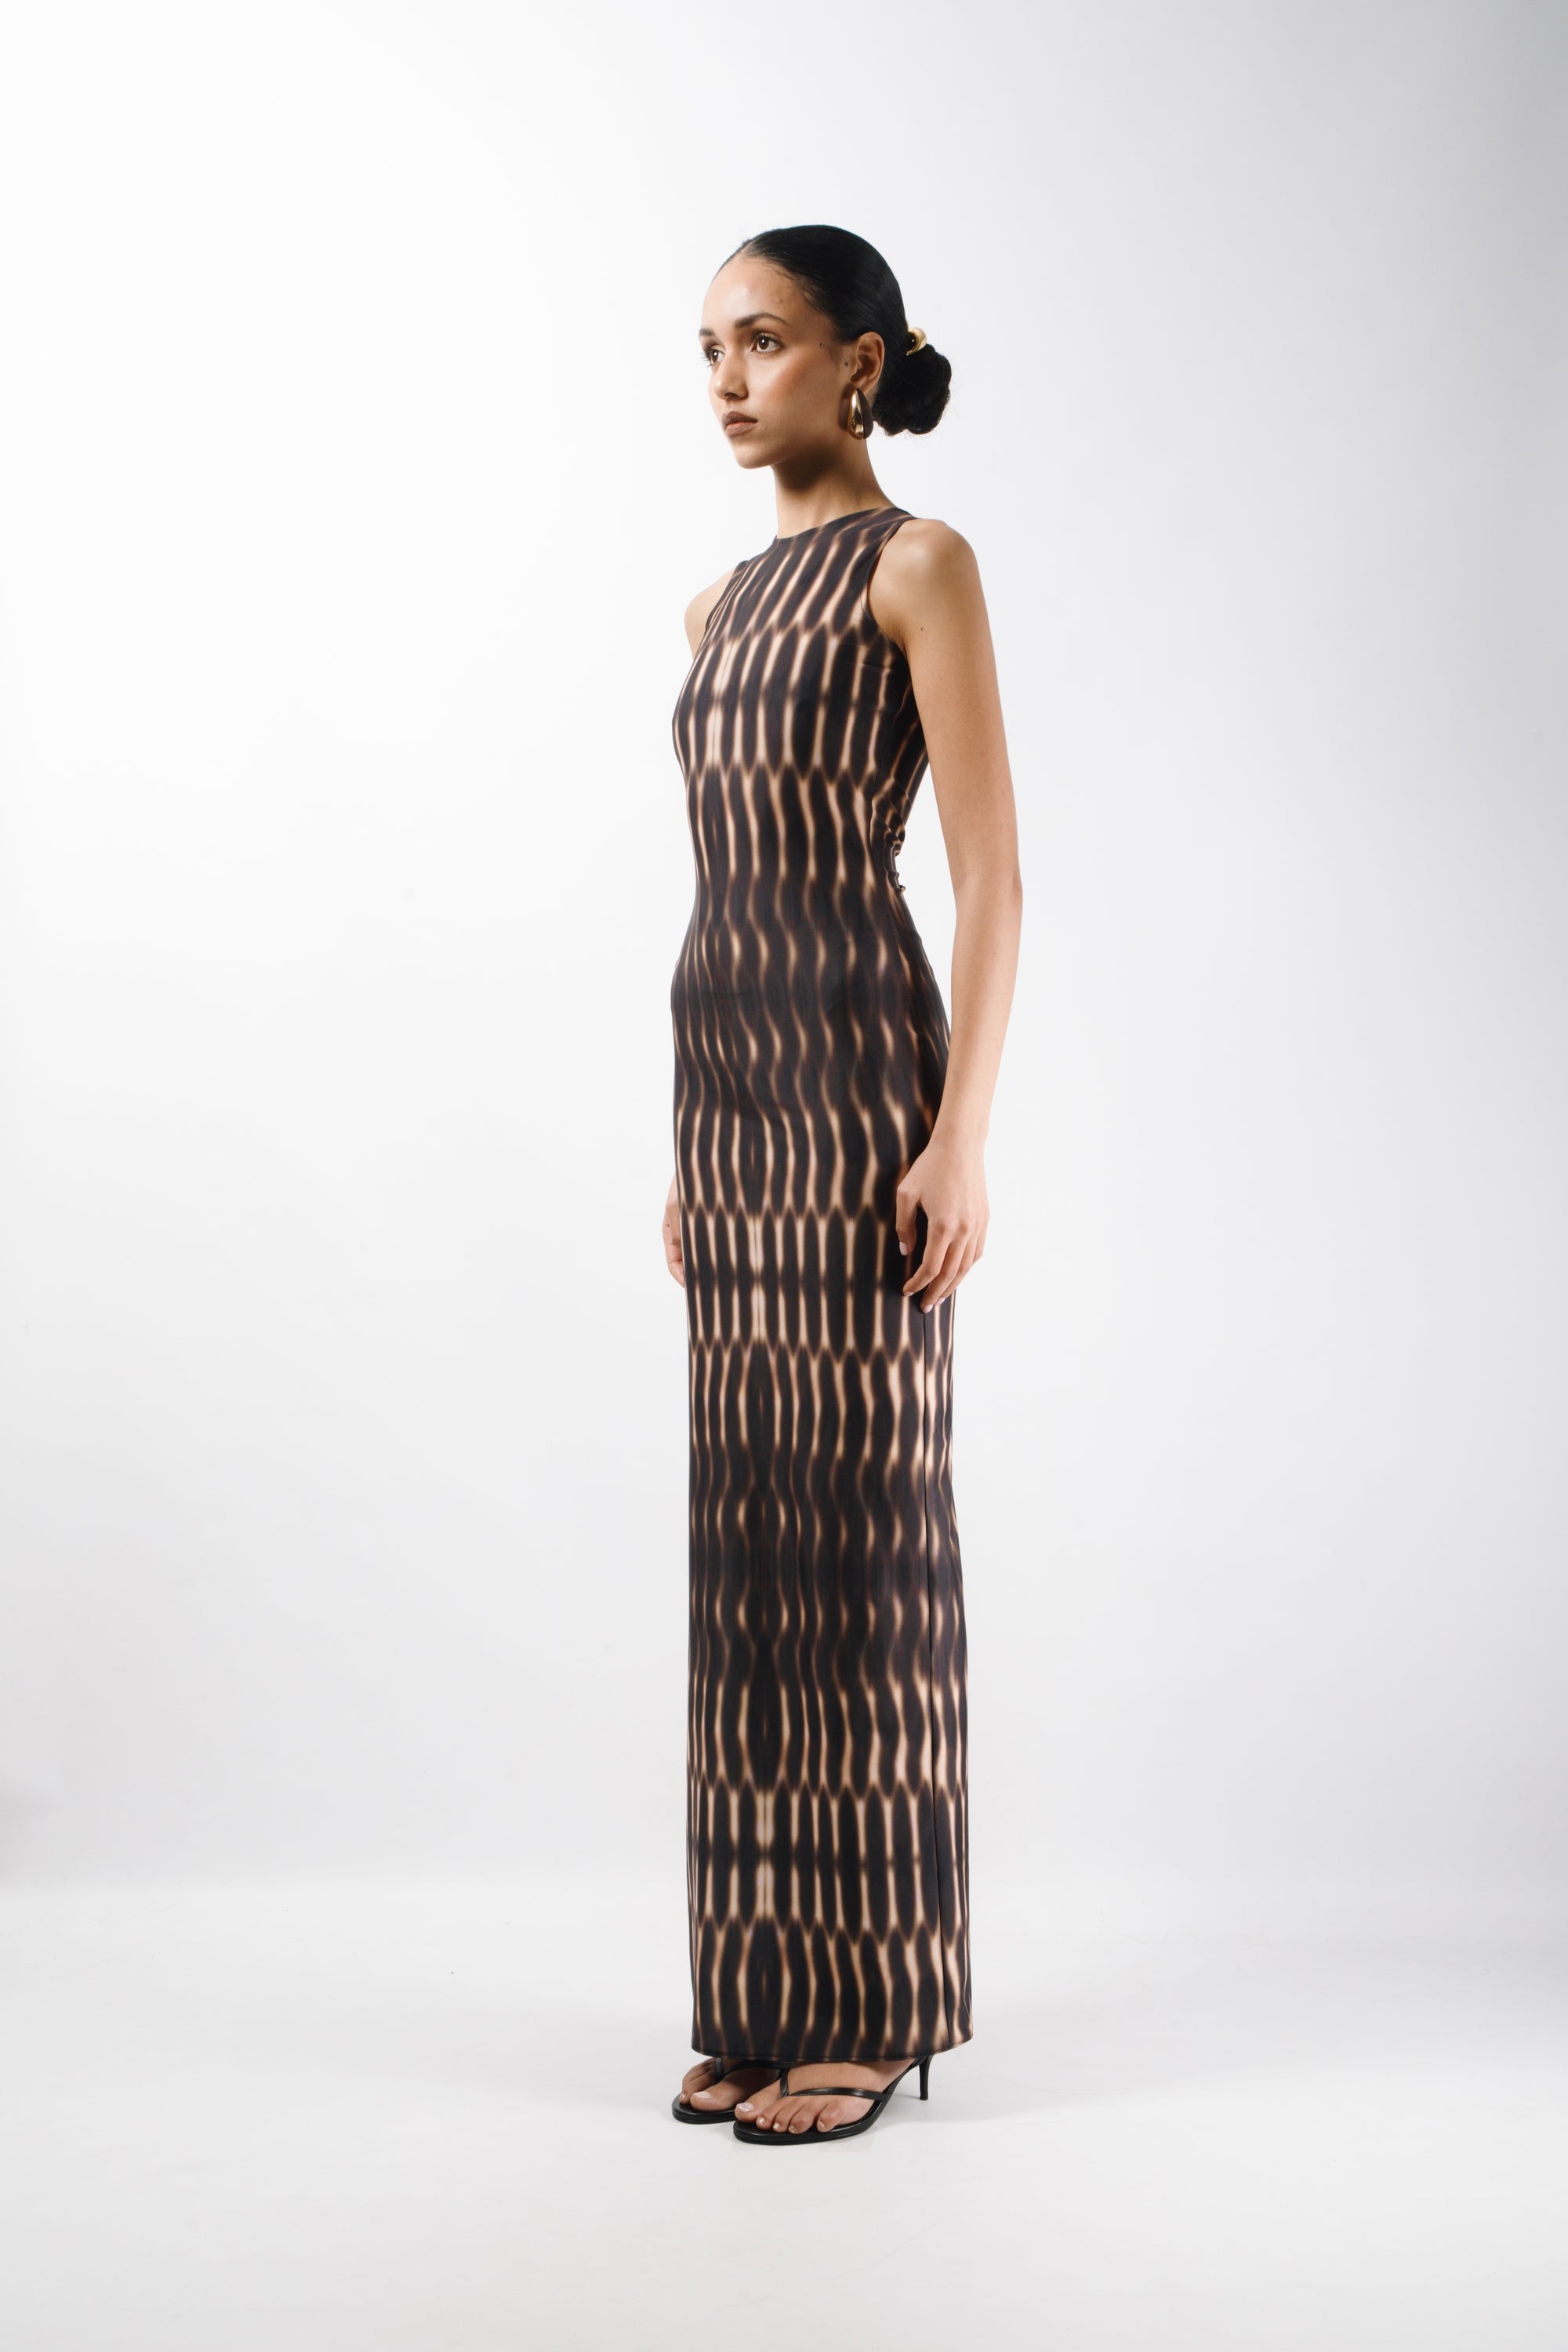 Melo gold dress in printed jersey stretch made from recycled plastic bottles, with a straight silhouette that hits at the ankle - side